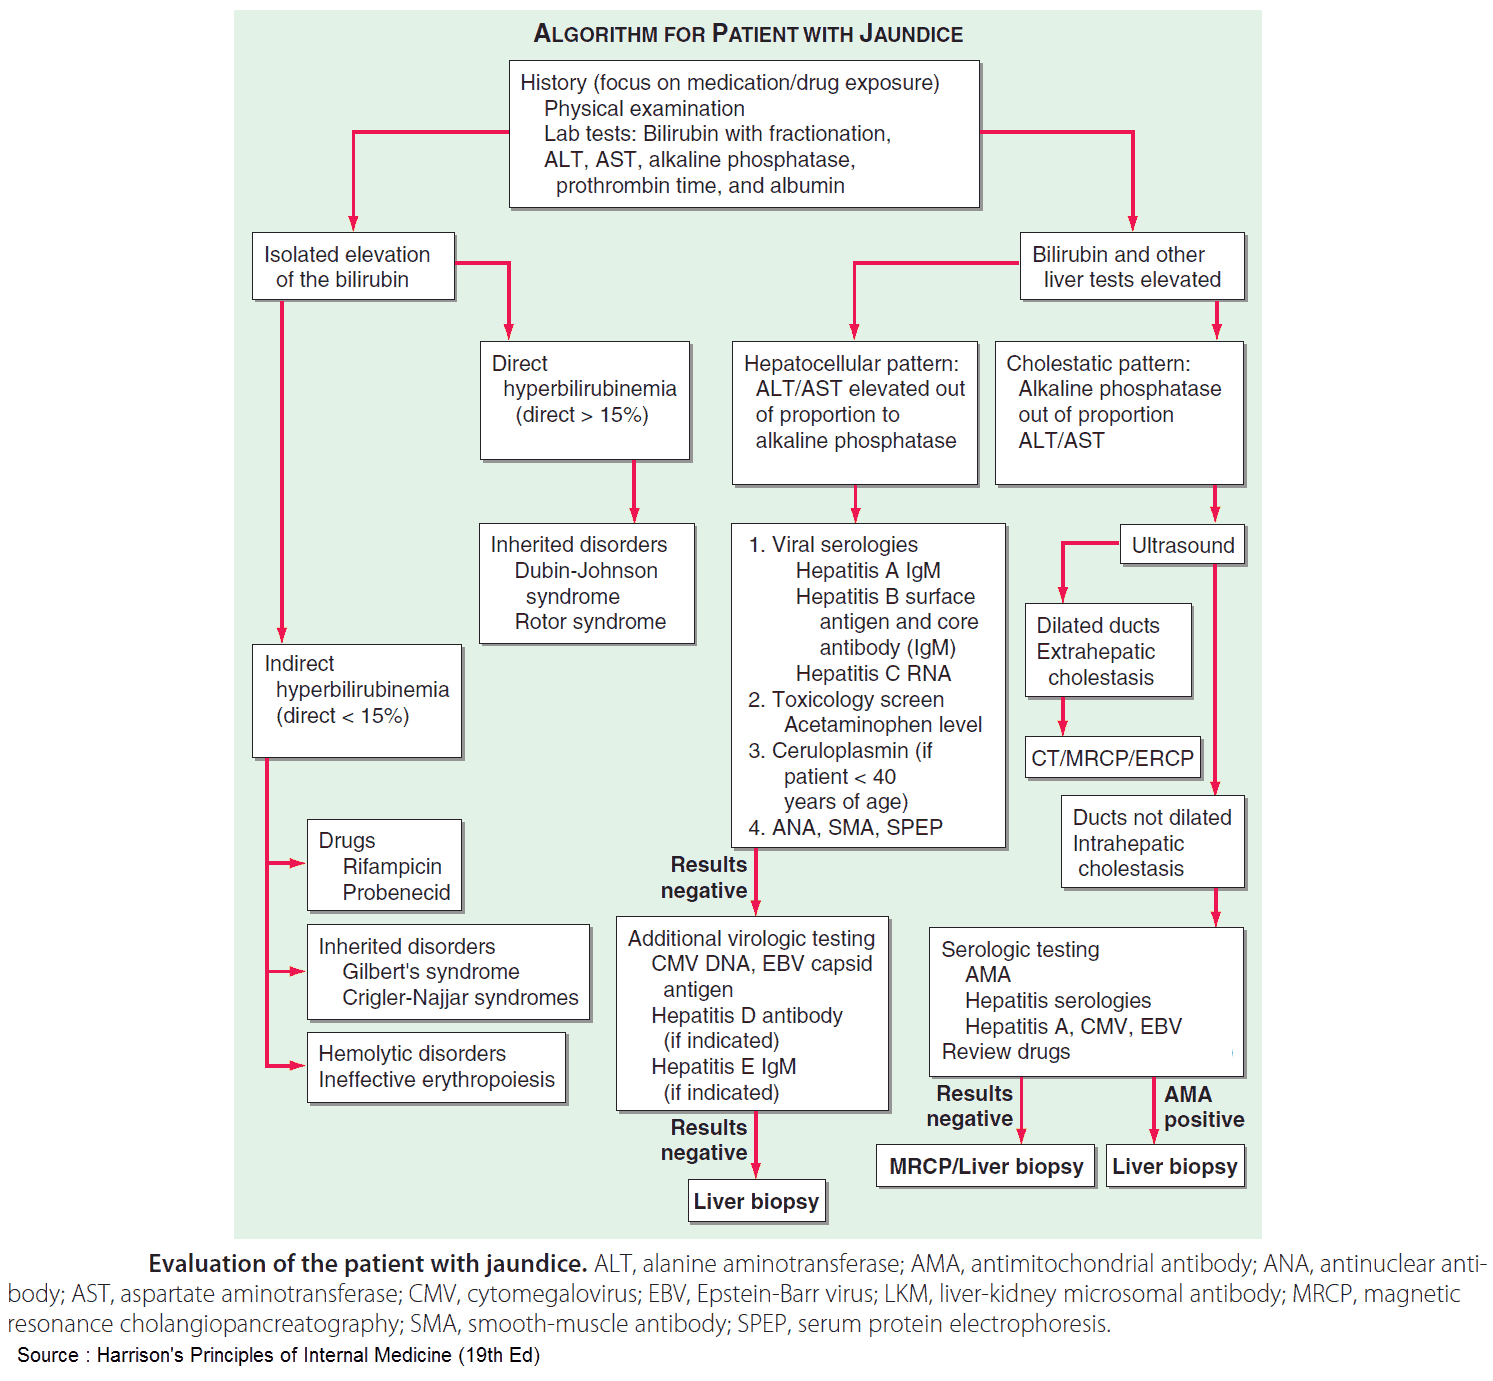 Algorithm for Evaluation of the patient with jaundice